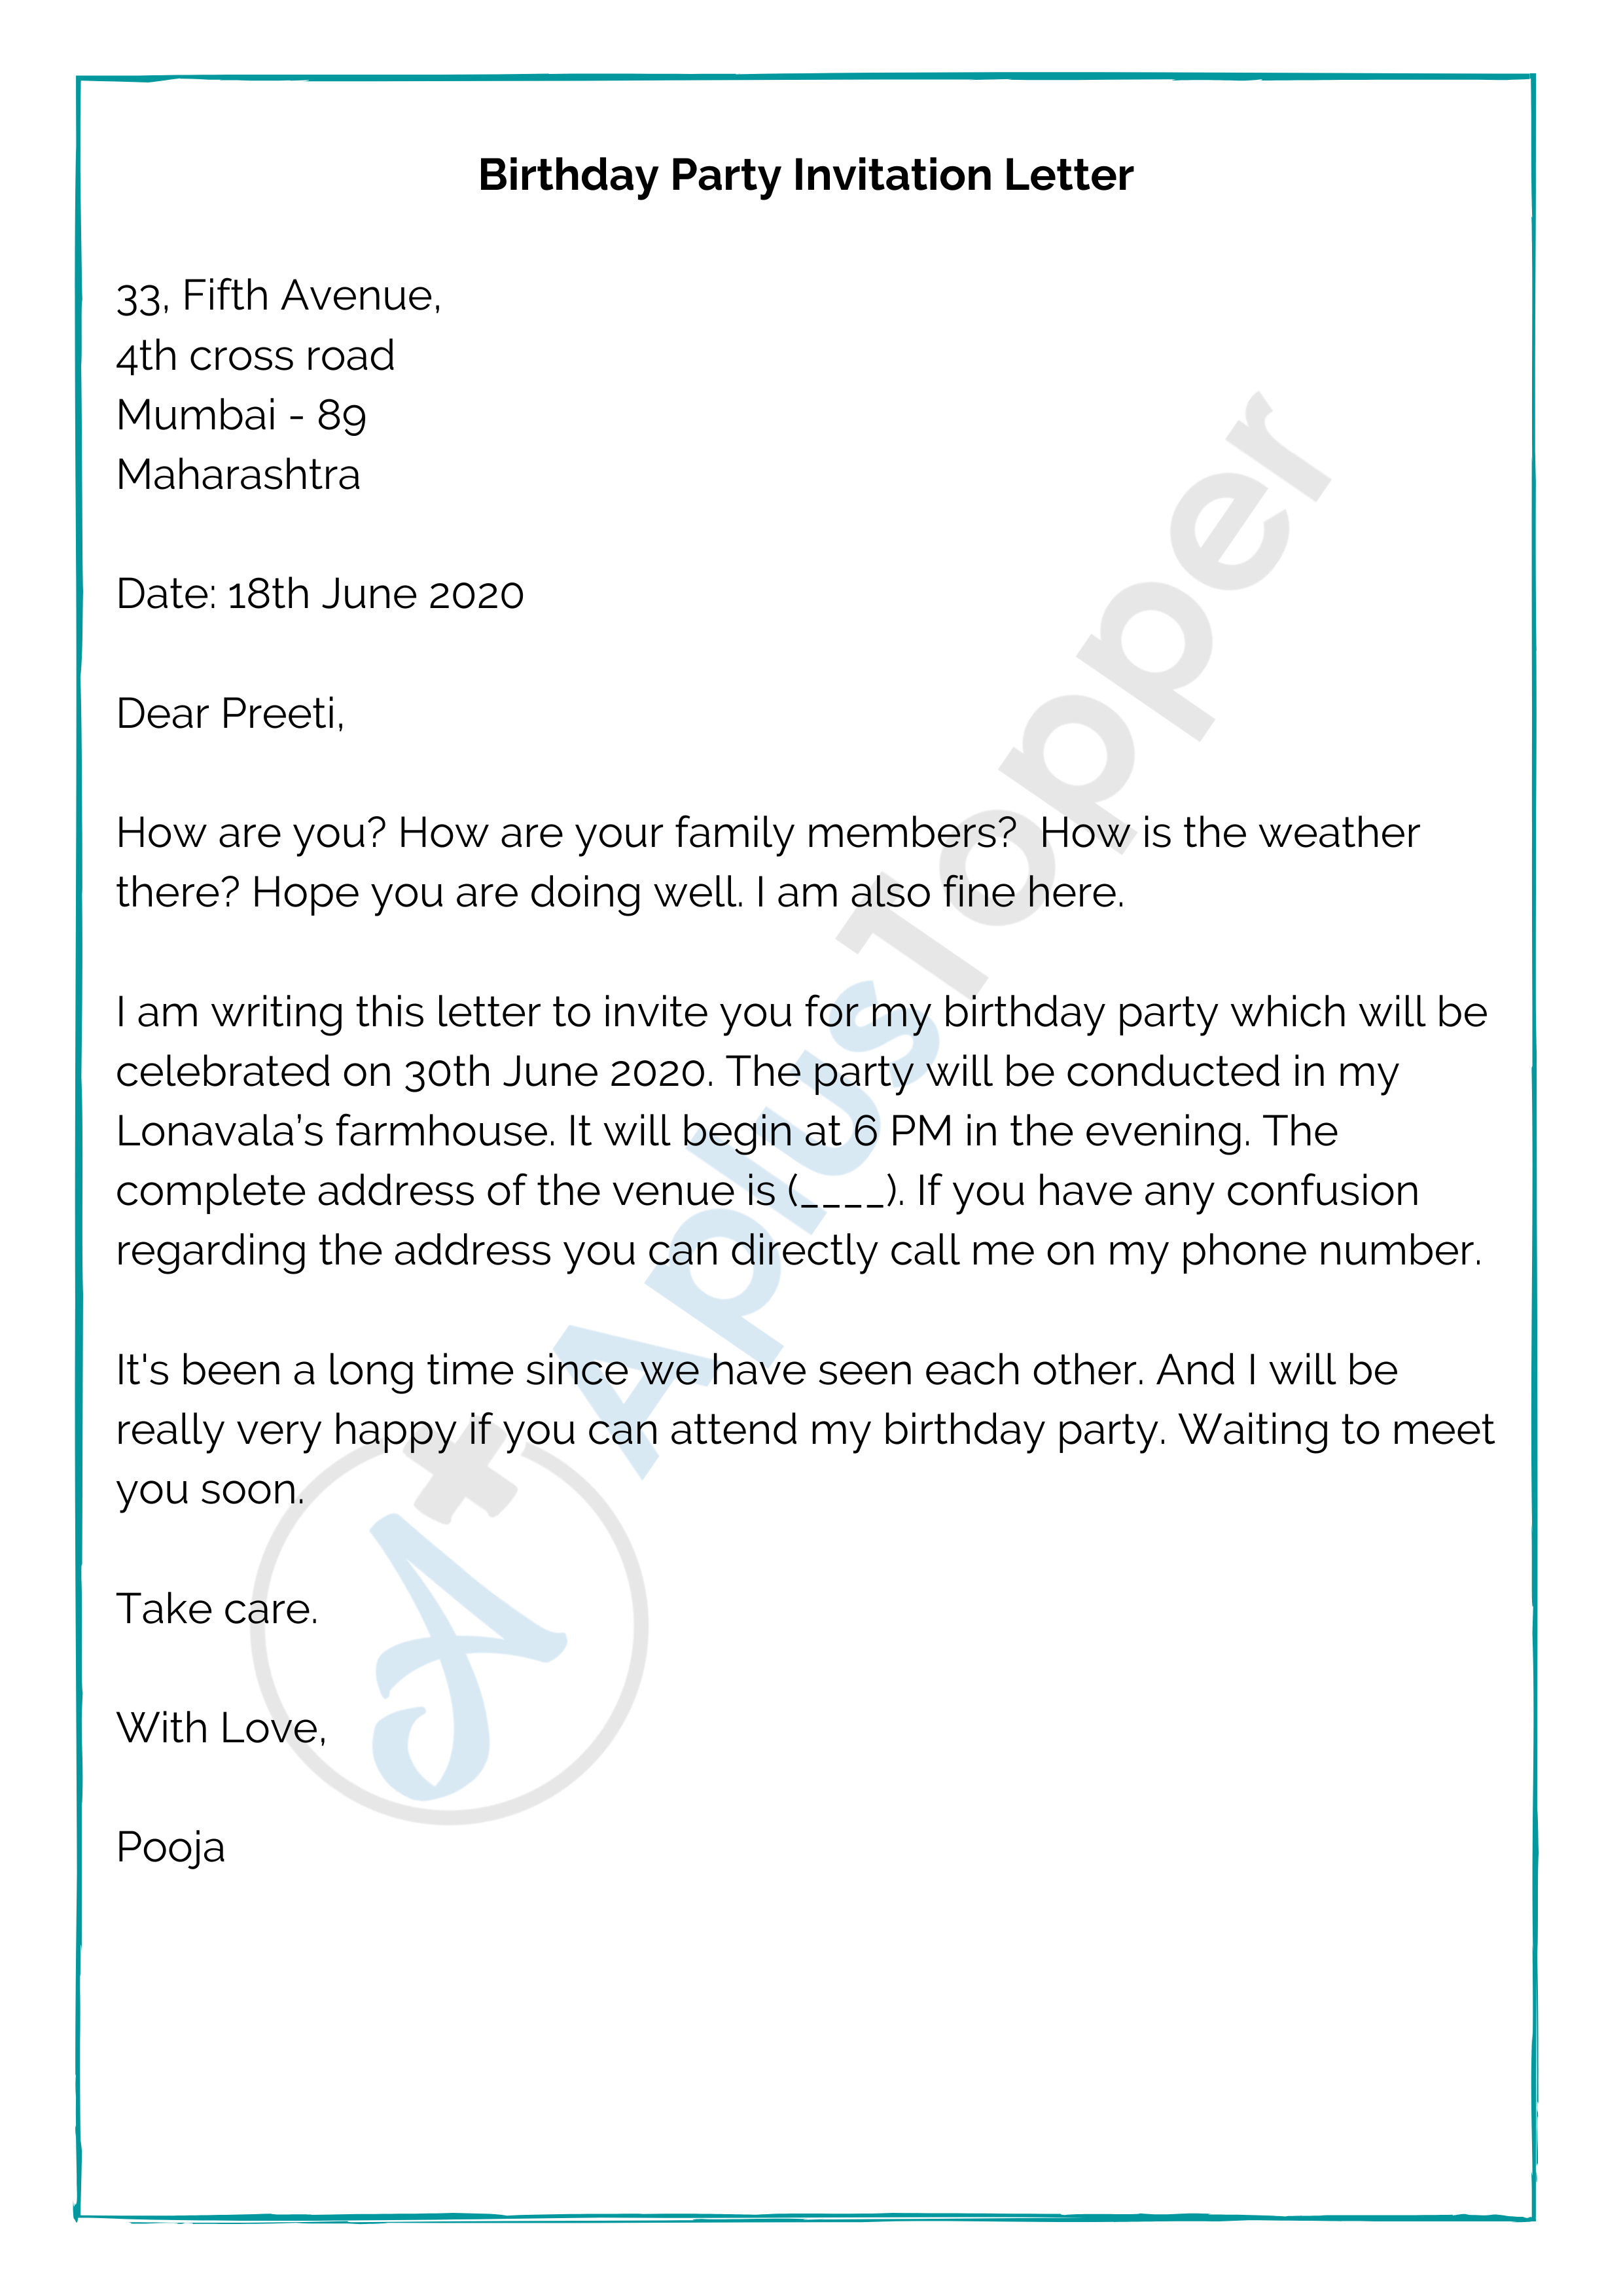 Informal Letter | Informal Letter Format, Samples and How To Write an